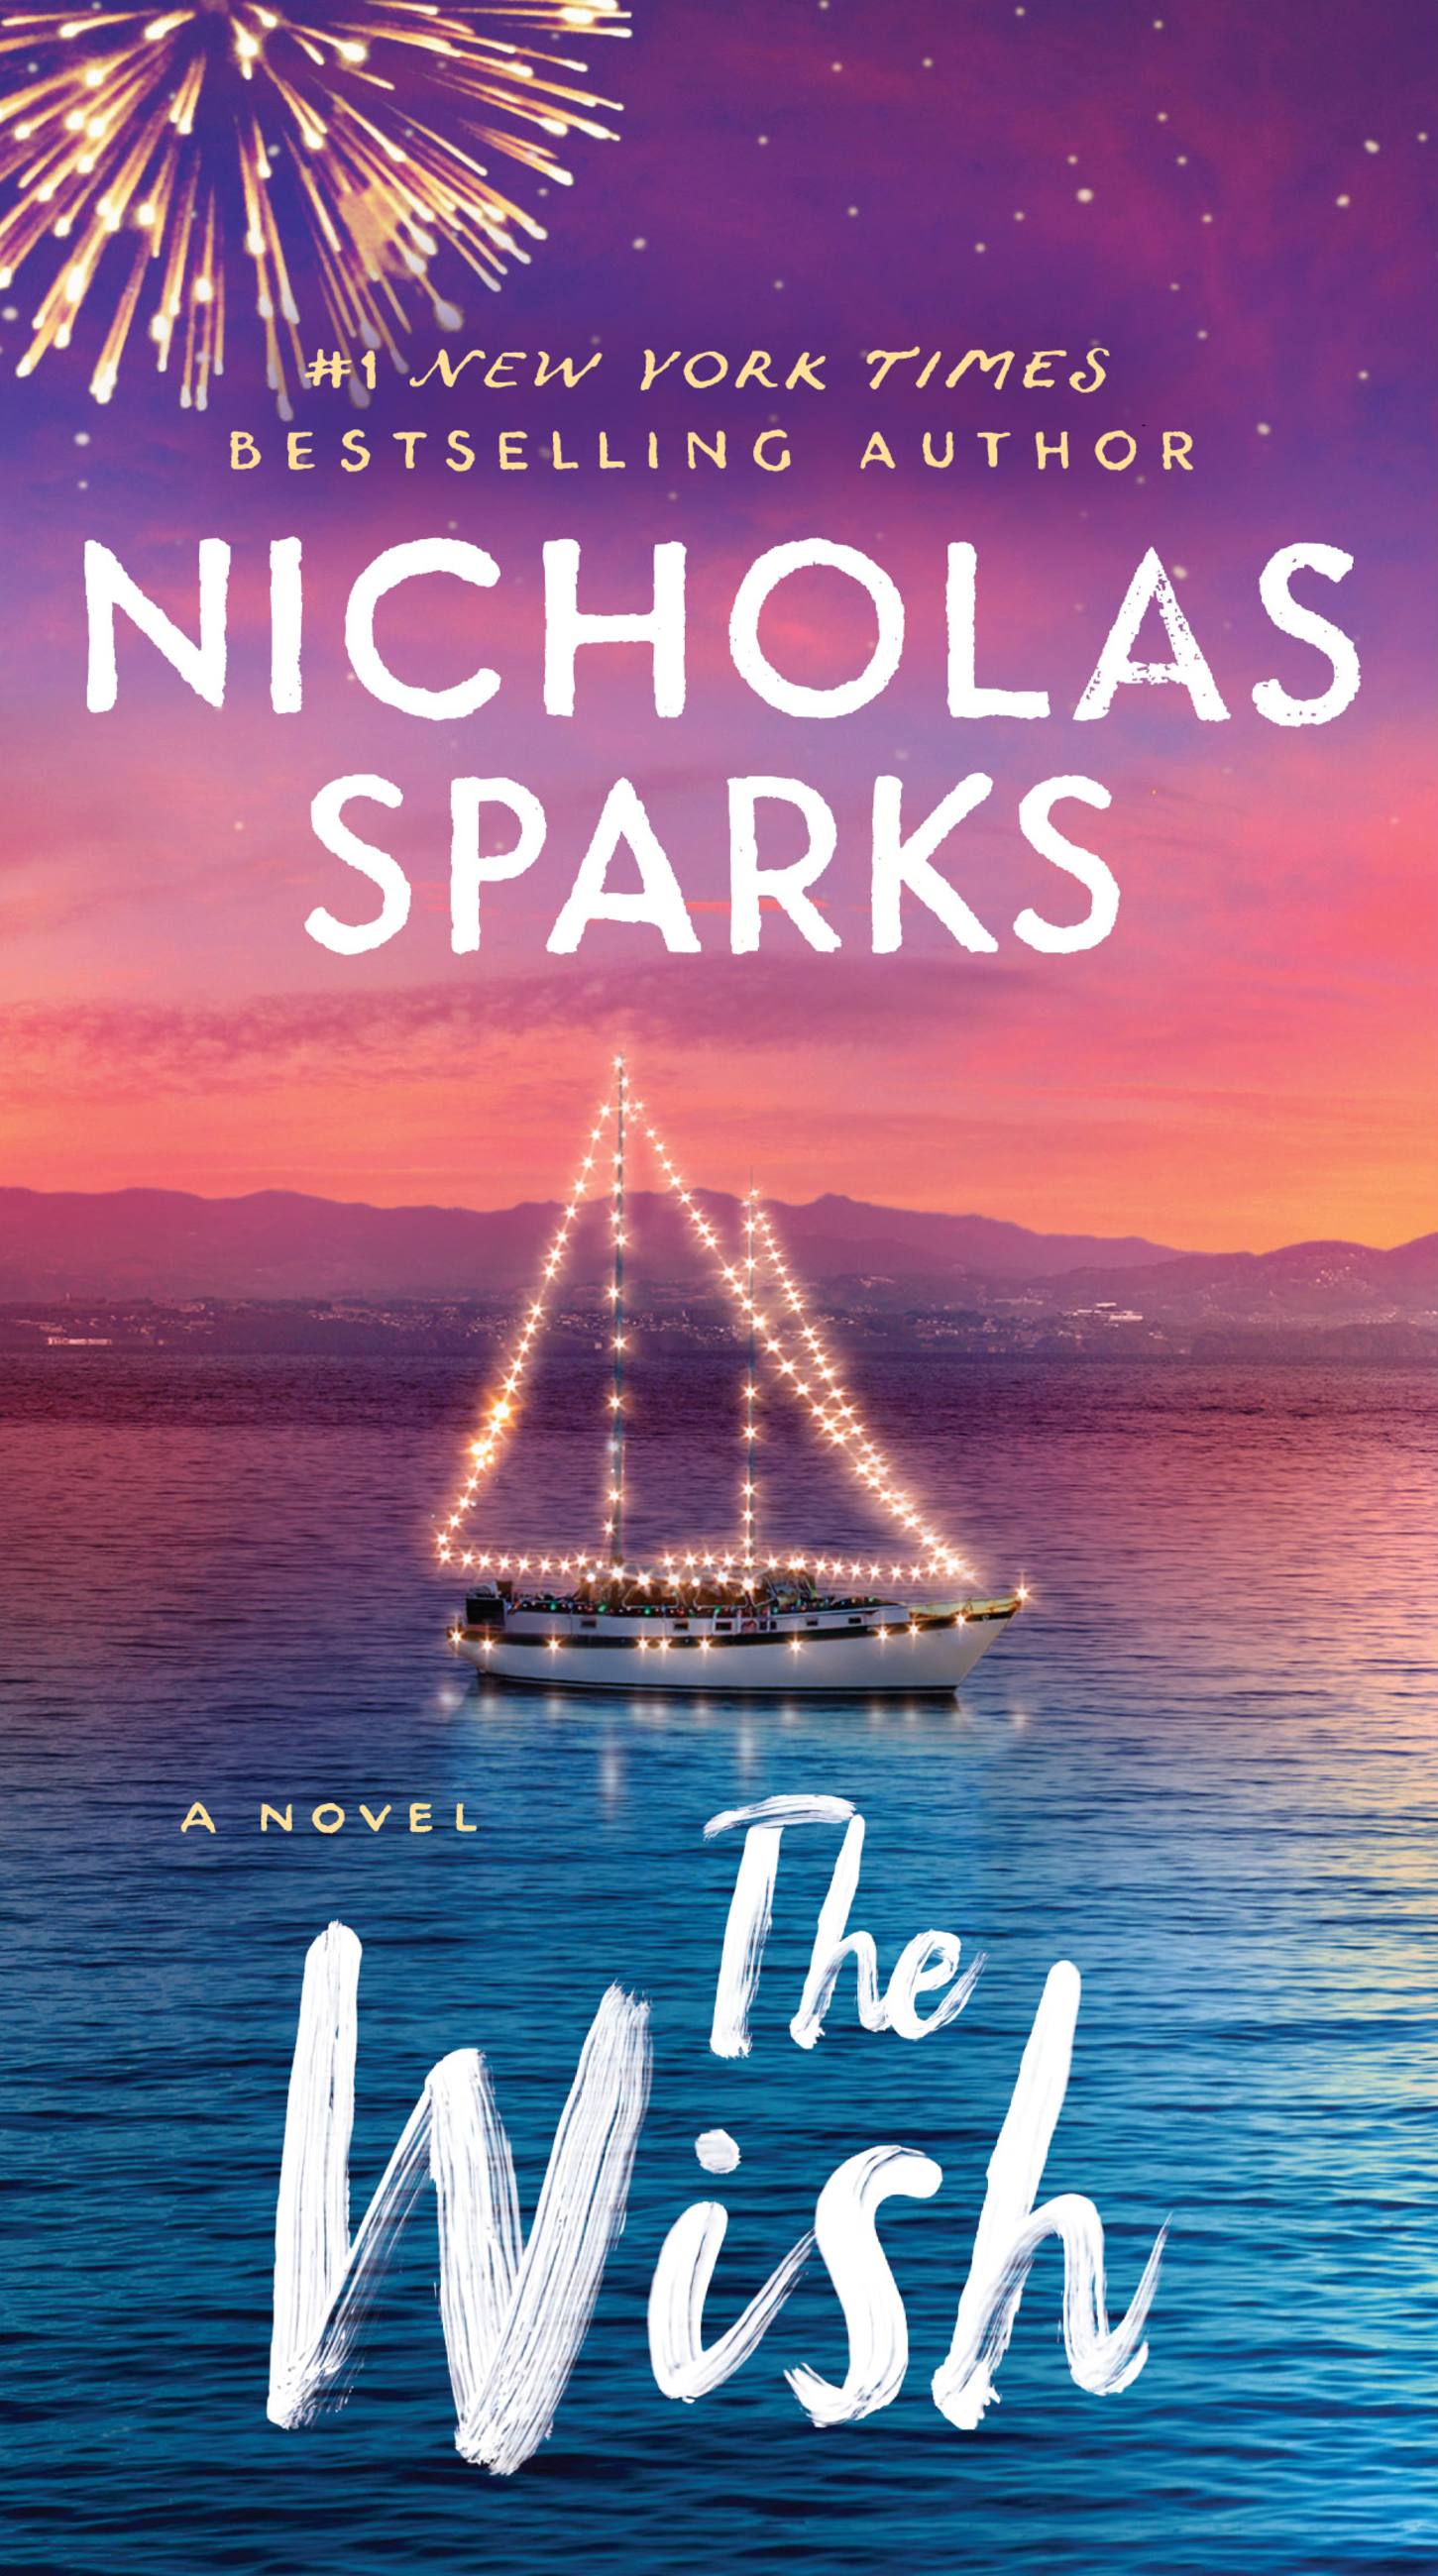 Based on the Book Discussion Group: The Choice by Nicholas Sparks